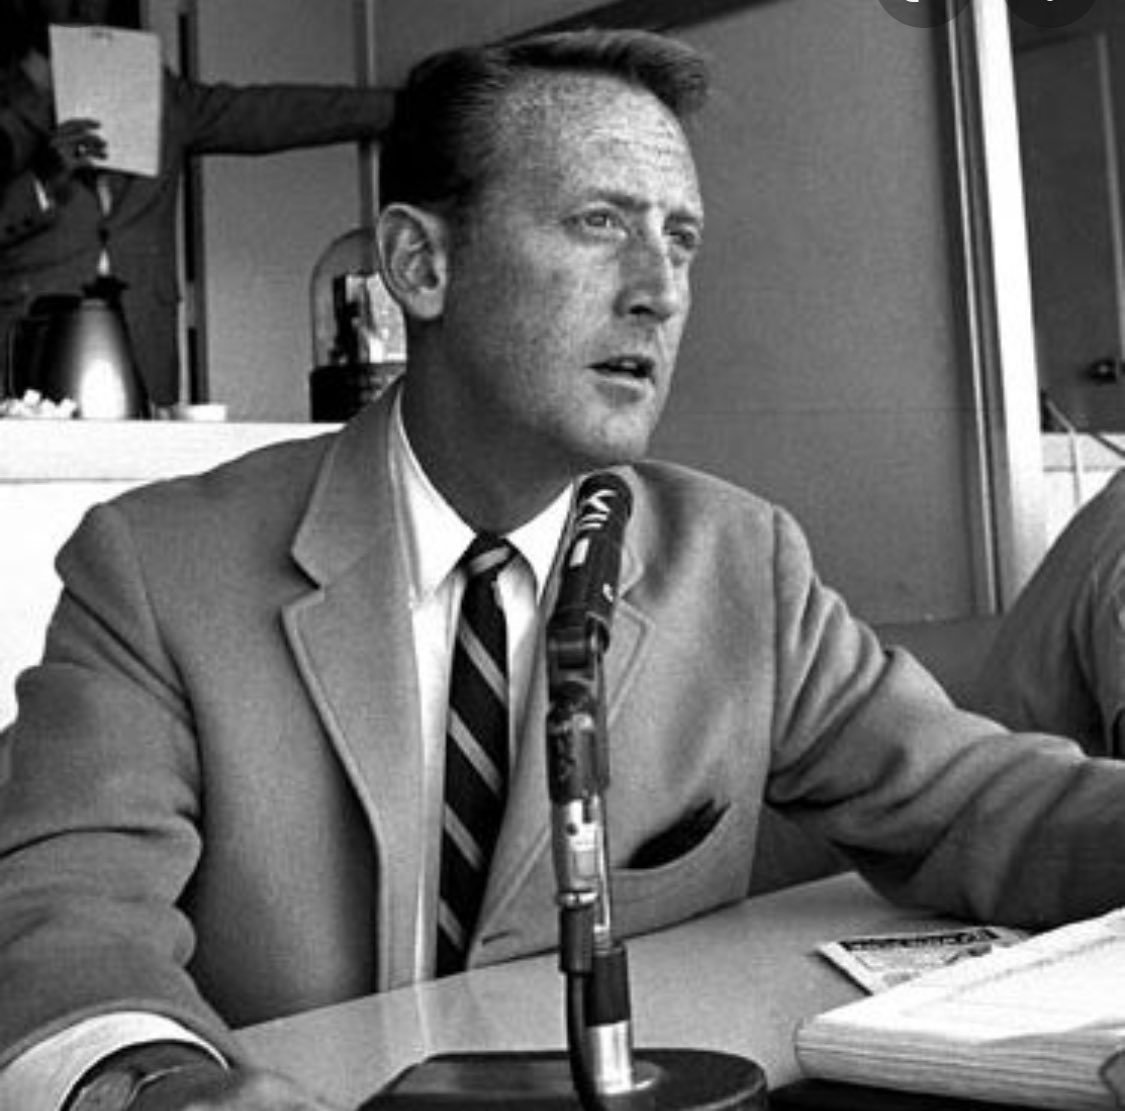 I grew up and fell in love with the dodgers and I could always count on Vin Scully to announce the greatest team in baseball history on a daily basis! RIP to the G.O.A.T